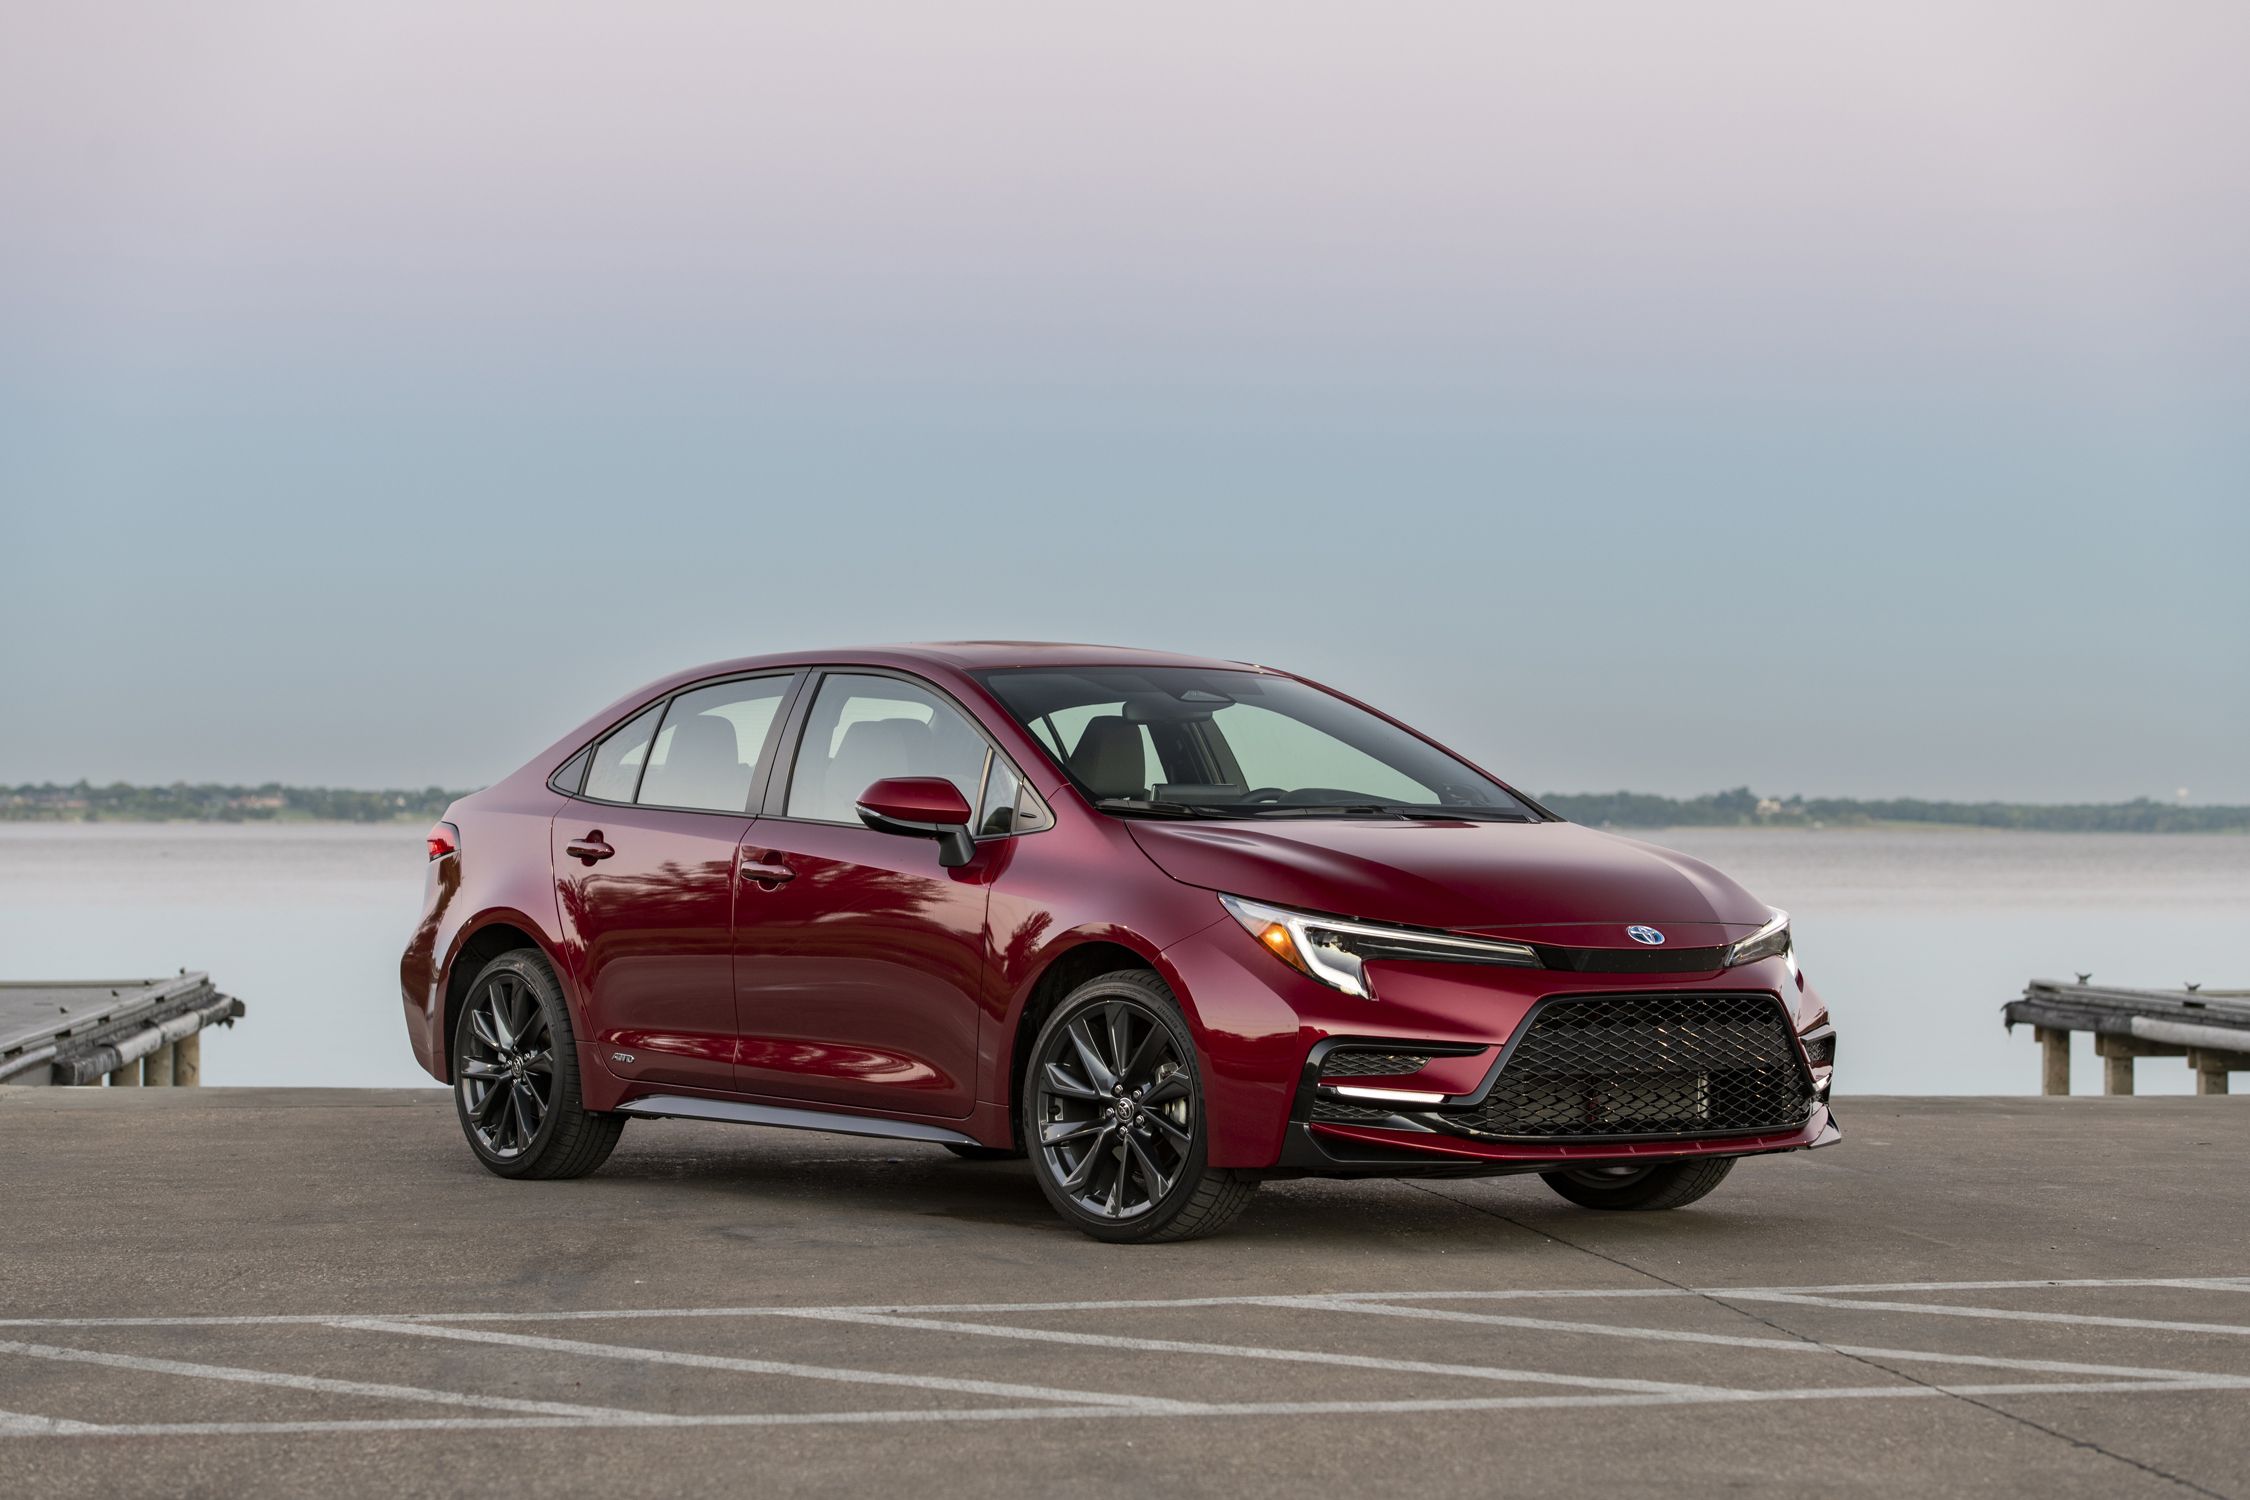 2023 Toyota Corolla Hybrid Costs Less, Forfeits MPG for Power